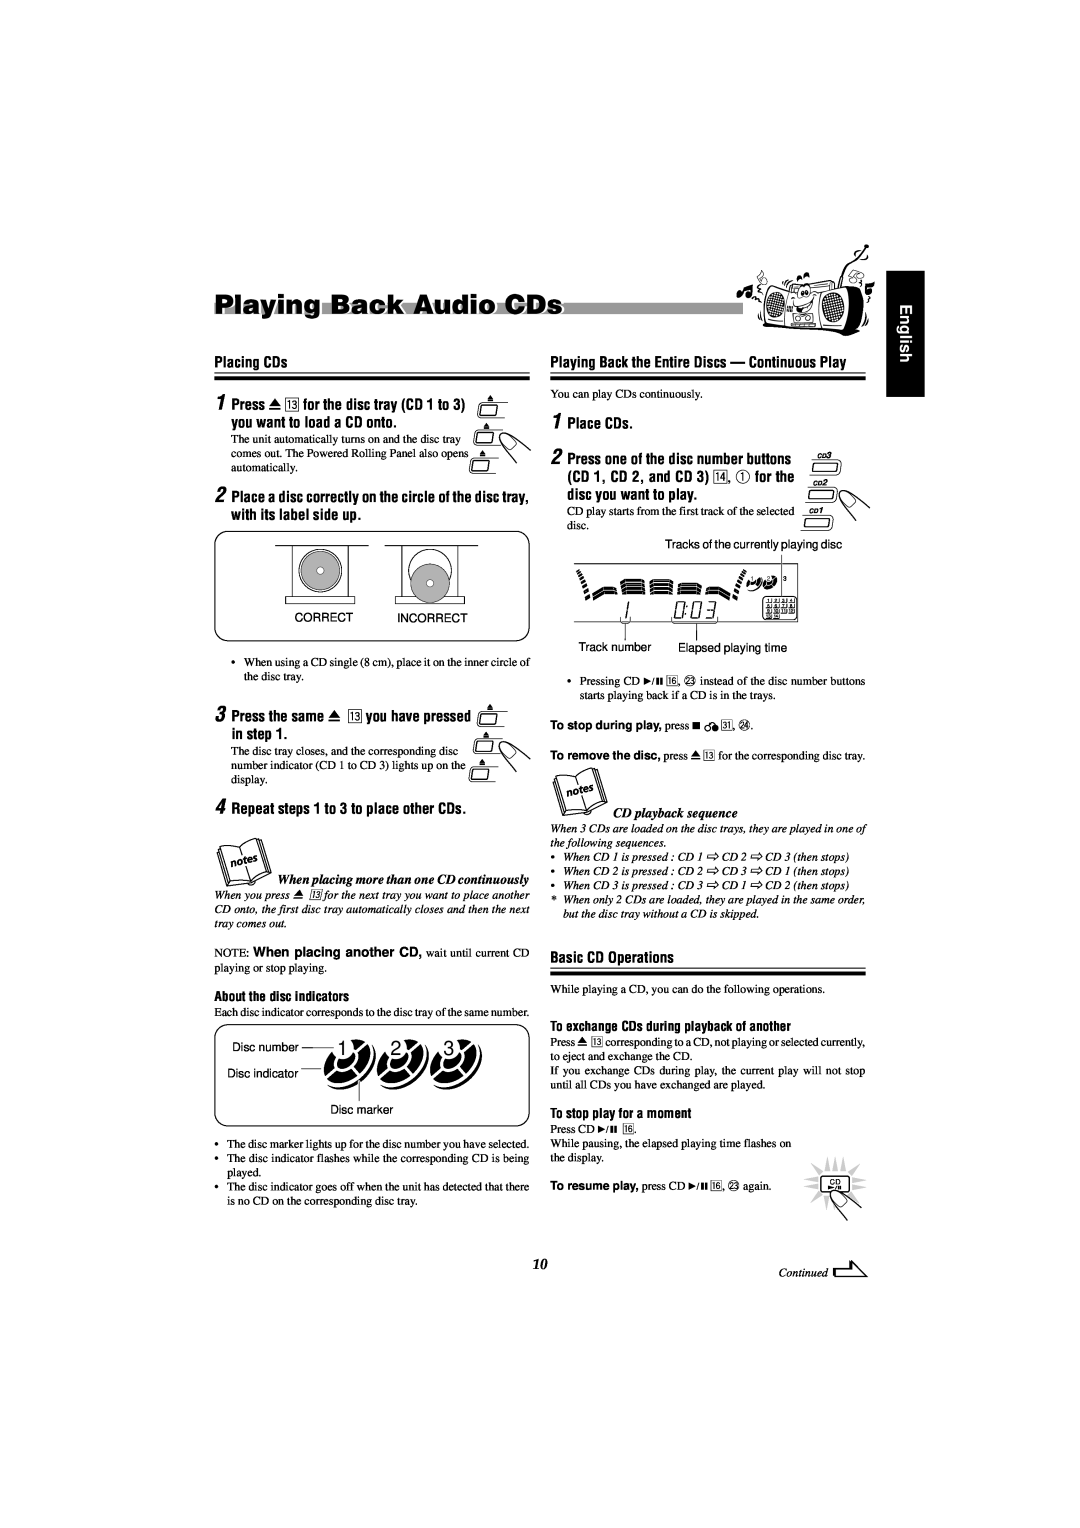 JVC MX-J555V Playing Back Audio CDs, English, Placing CDs, Playing Back the Entire Discs - Continuous Play, Place CDs 